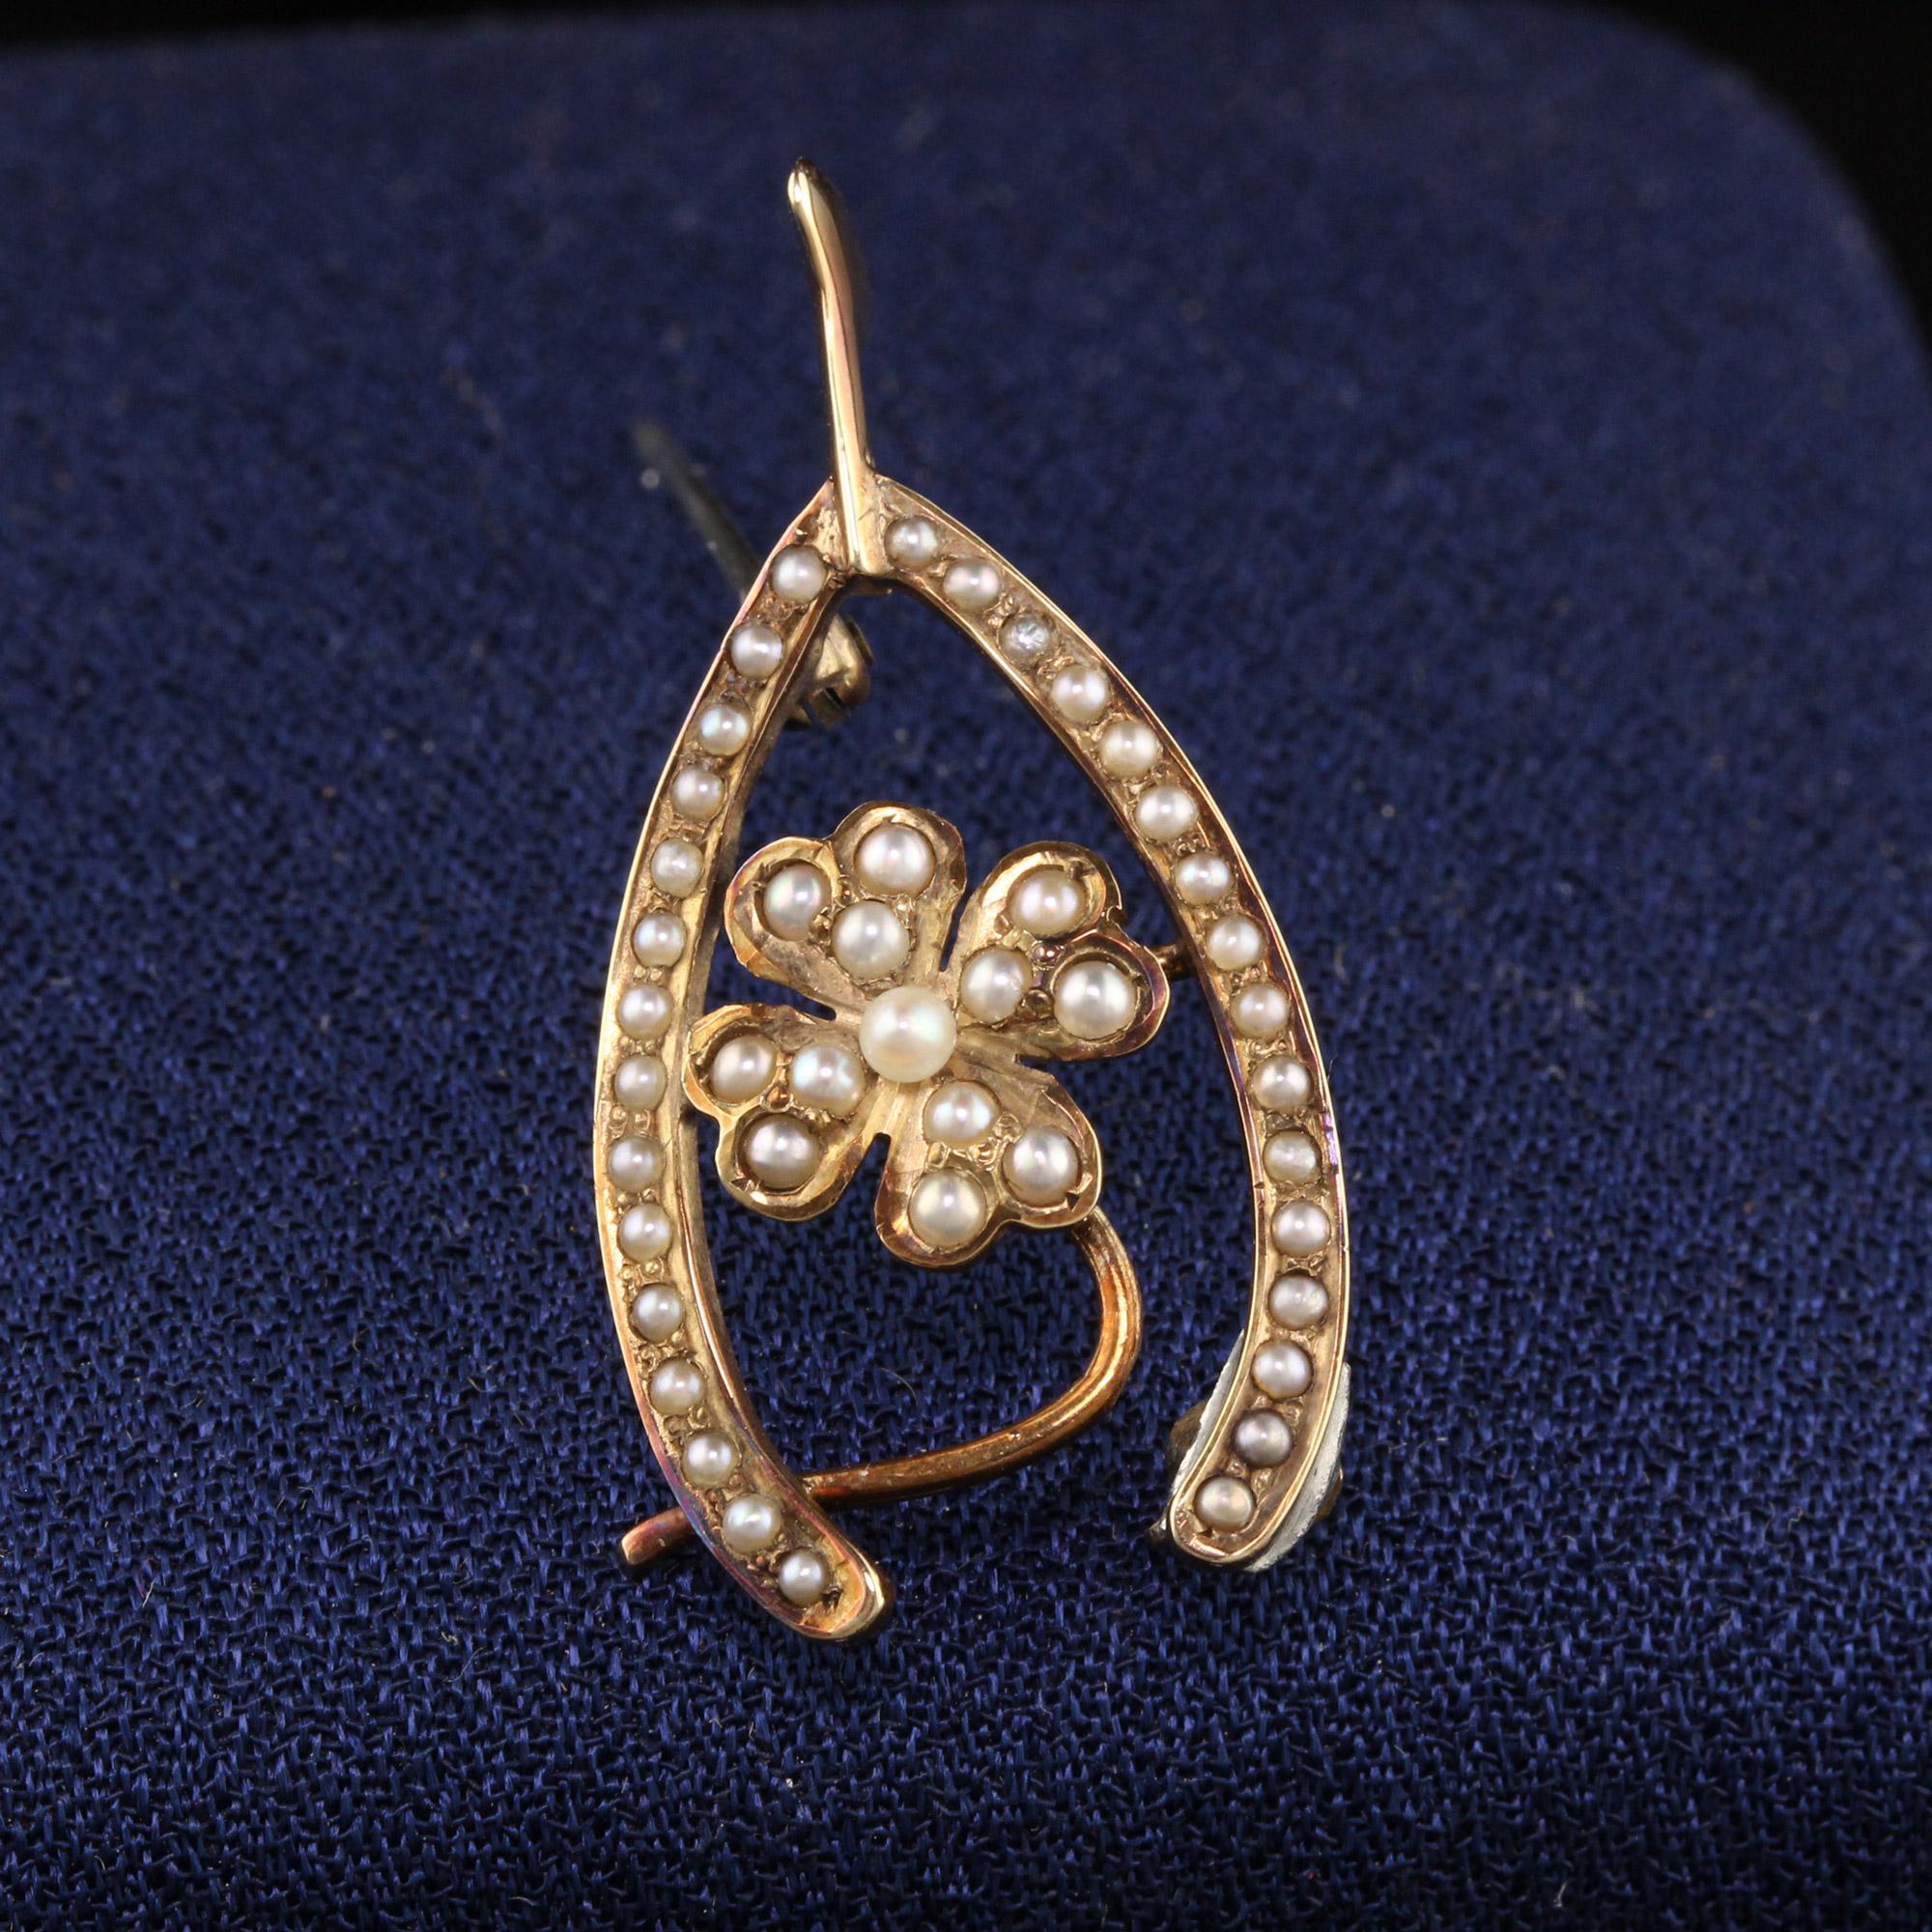 Beautiful Antique Victorian 14K Yellow Gold Seed Pearl Shamrock Wishbone Pin. This beautiful pin is crafted in14k yellow gold. It has seed pearls covering the top portion of the pin and is in great condition.

Item #P0144

Metal: 14K Yellow